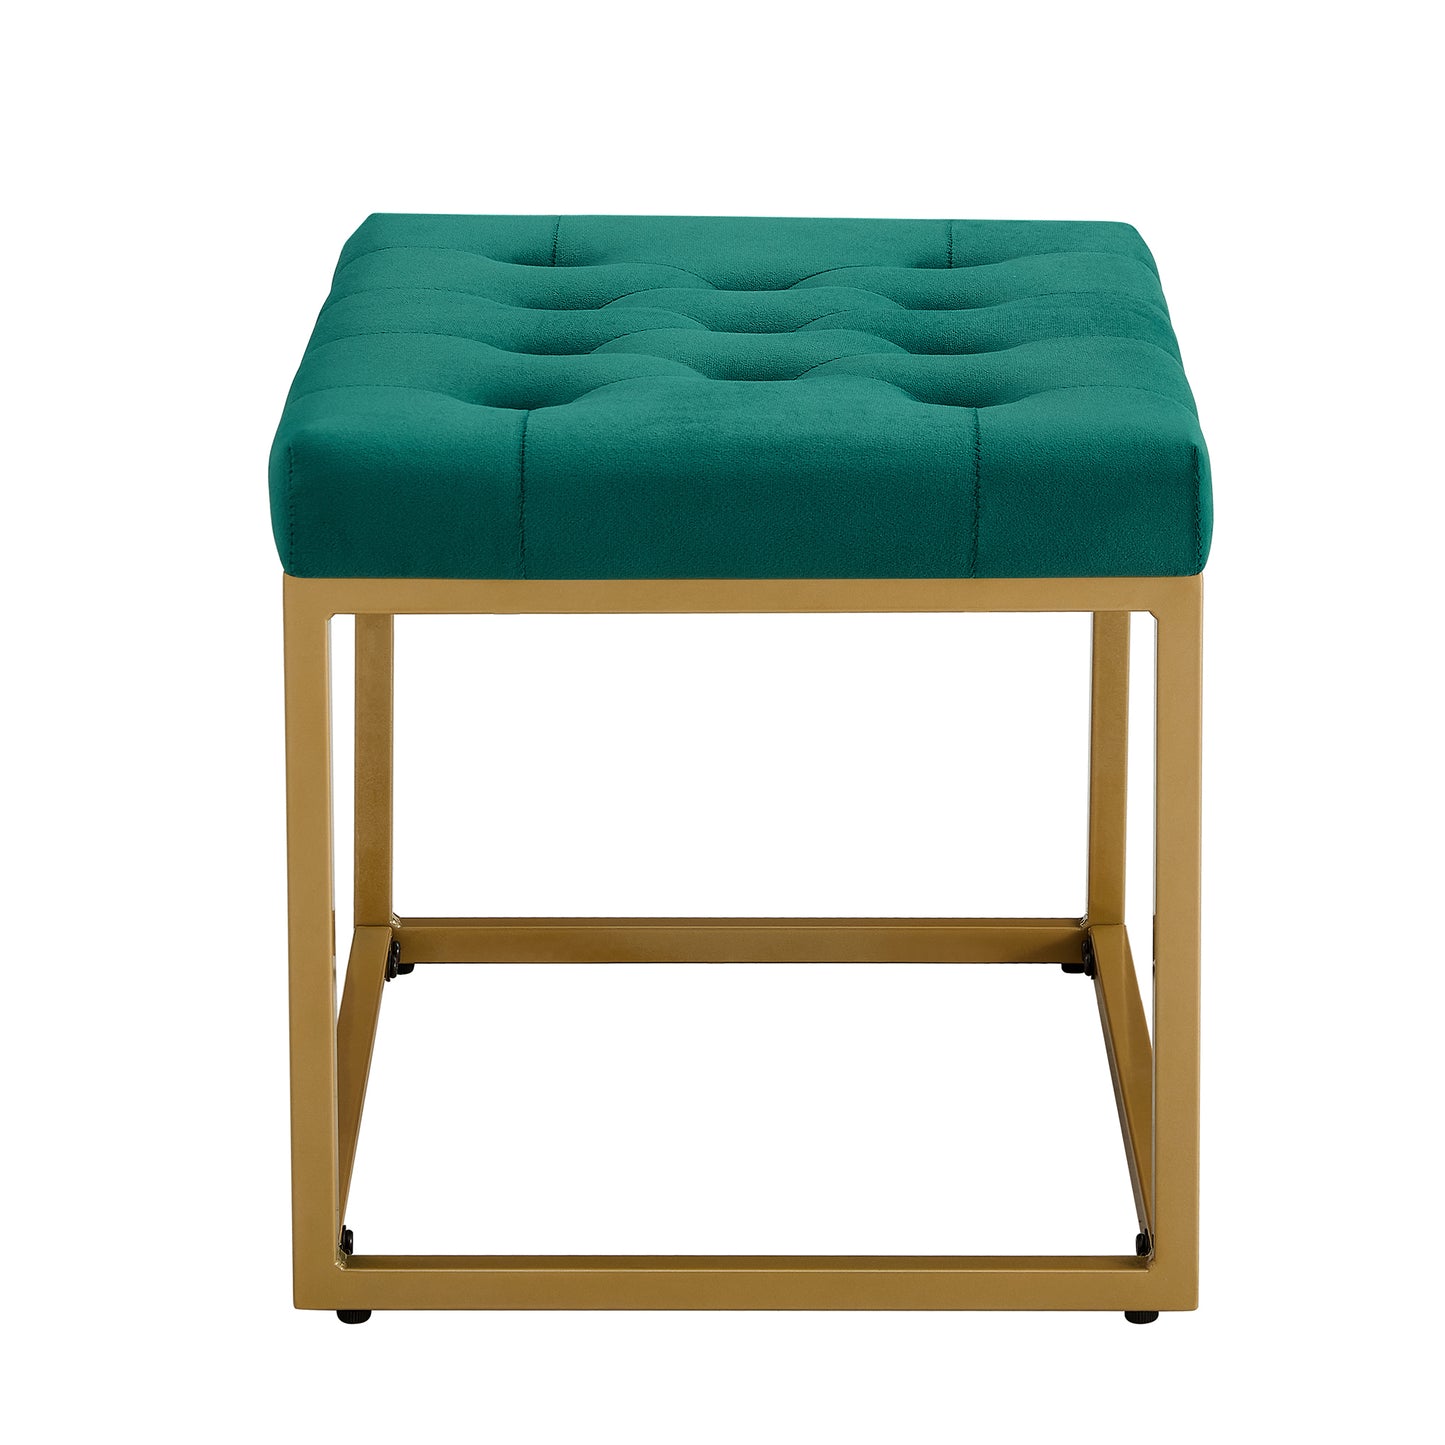 Velvet Shoe Changing Stool,Dark Green Footstool, Square Vanity Chair, Sofa stool,Makup Stool .Vanity Seat  Piano Bench .Suitable for Clothes Shop,Living room, porch, fitting room Bedroom ST-001-LGN